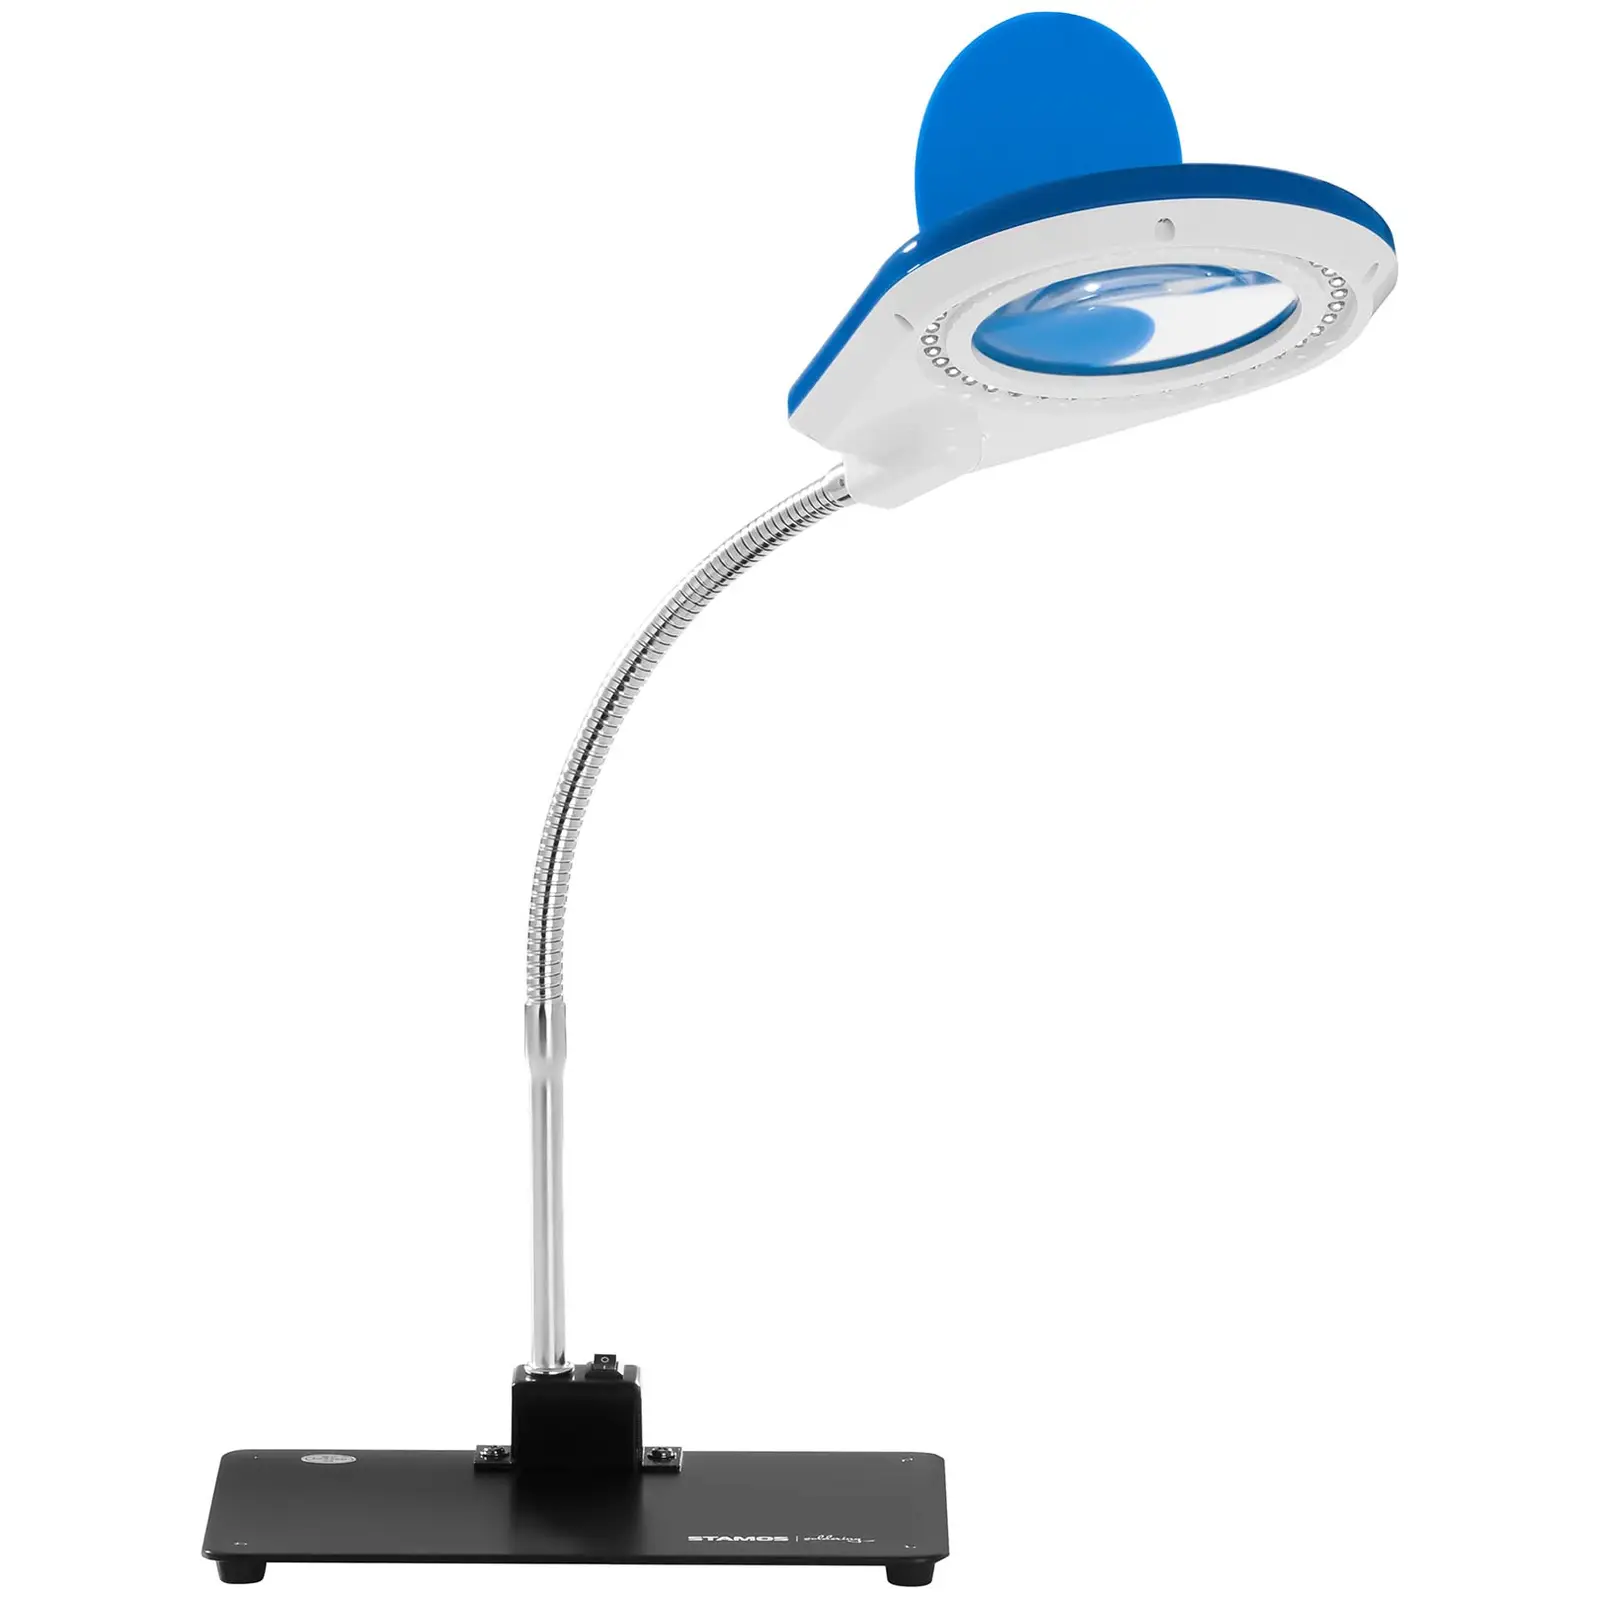 Magnifying Glass Lamp - 5-10 time enlargement - Blue